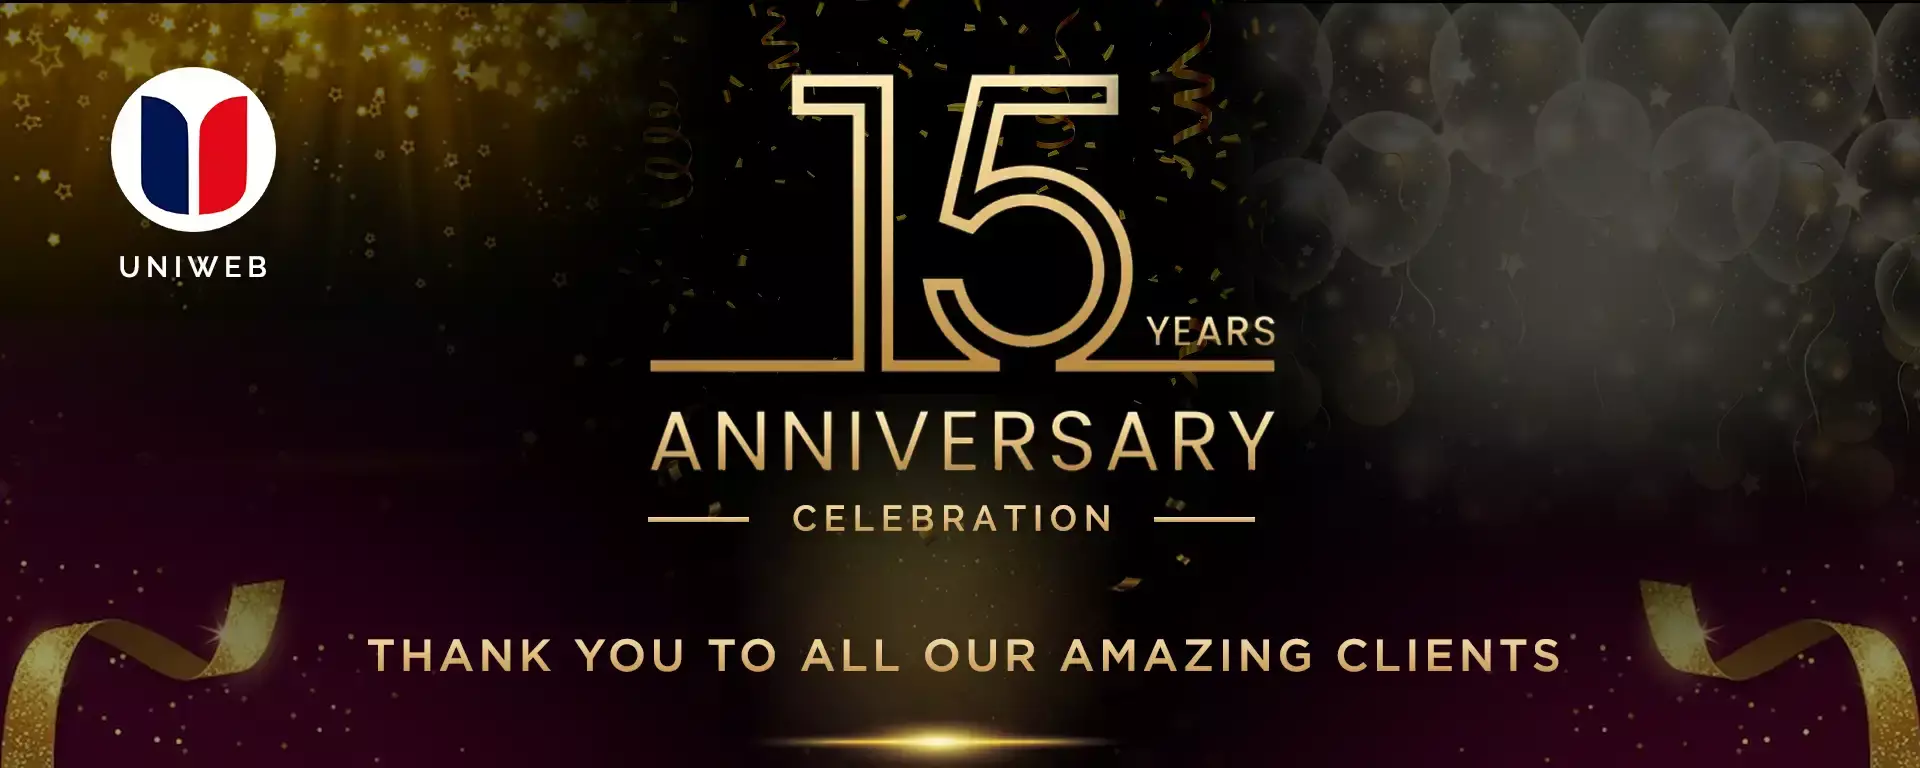 A banner image for the 15 year anniversary celebration of UNIweb